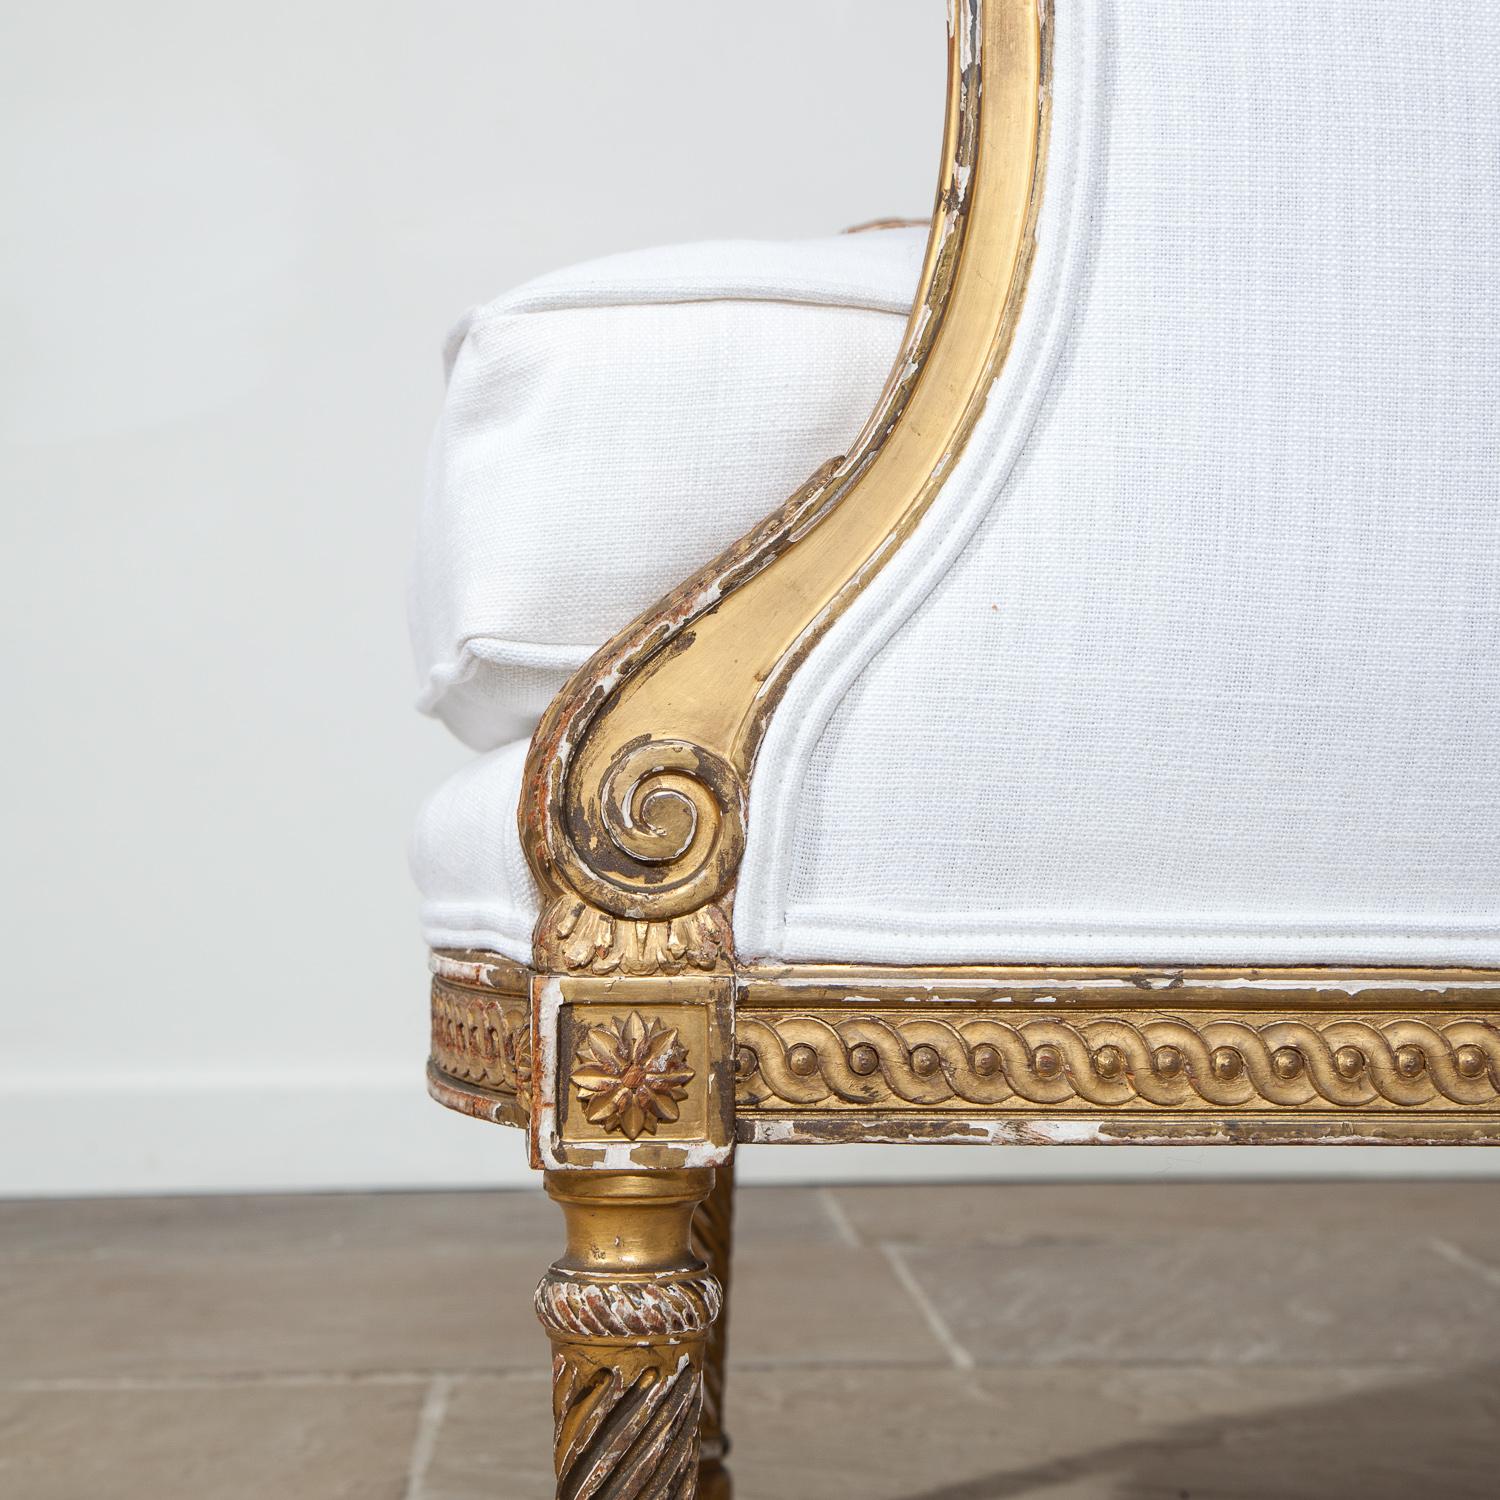 19th Century French Giltwood Duchesse Brisee, newly upholstered in White Linen 5